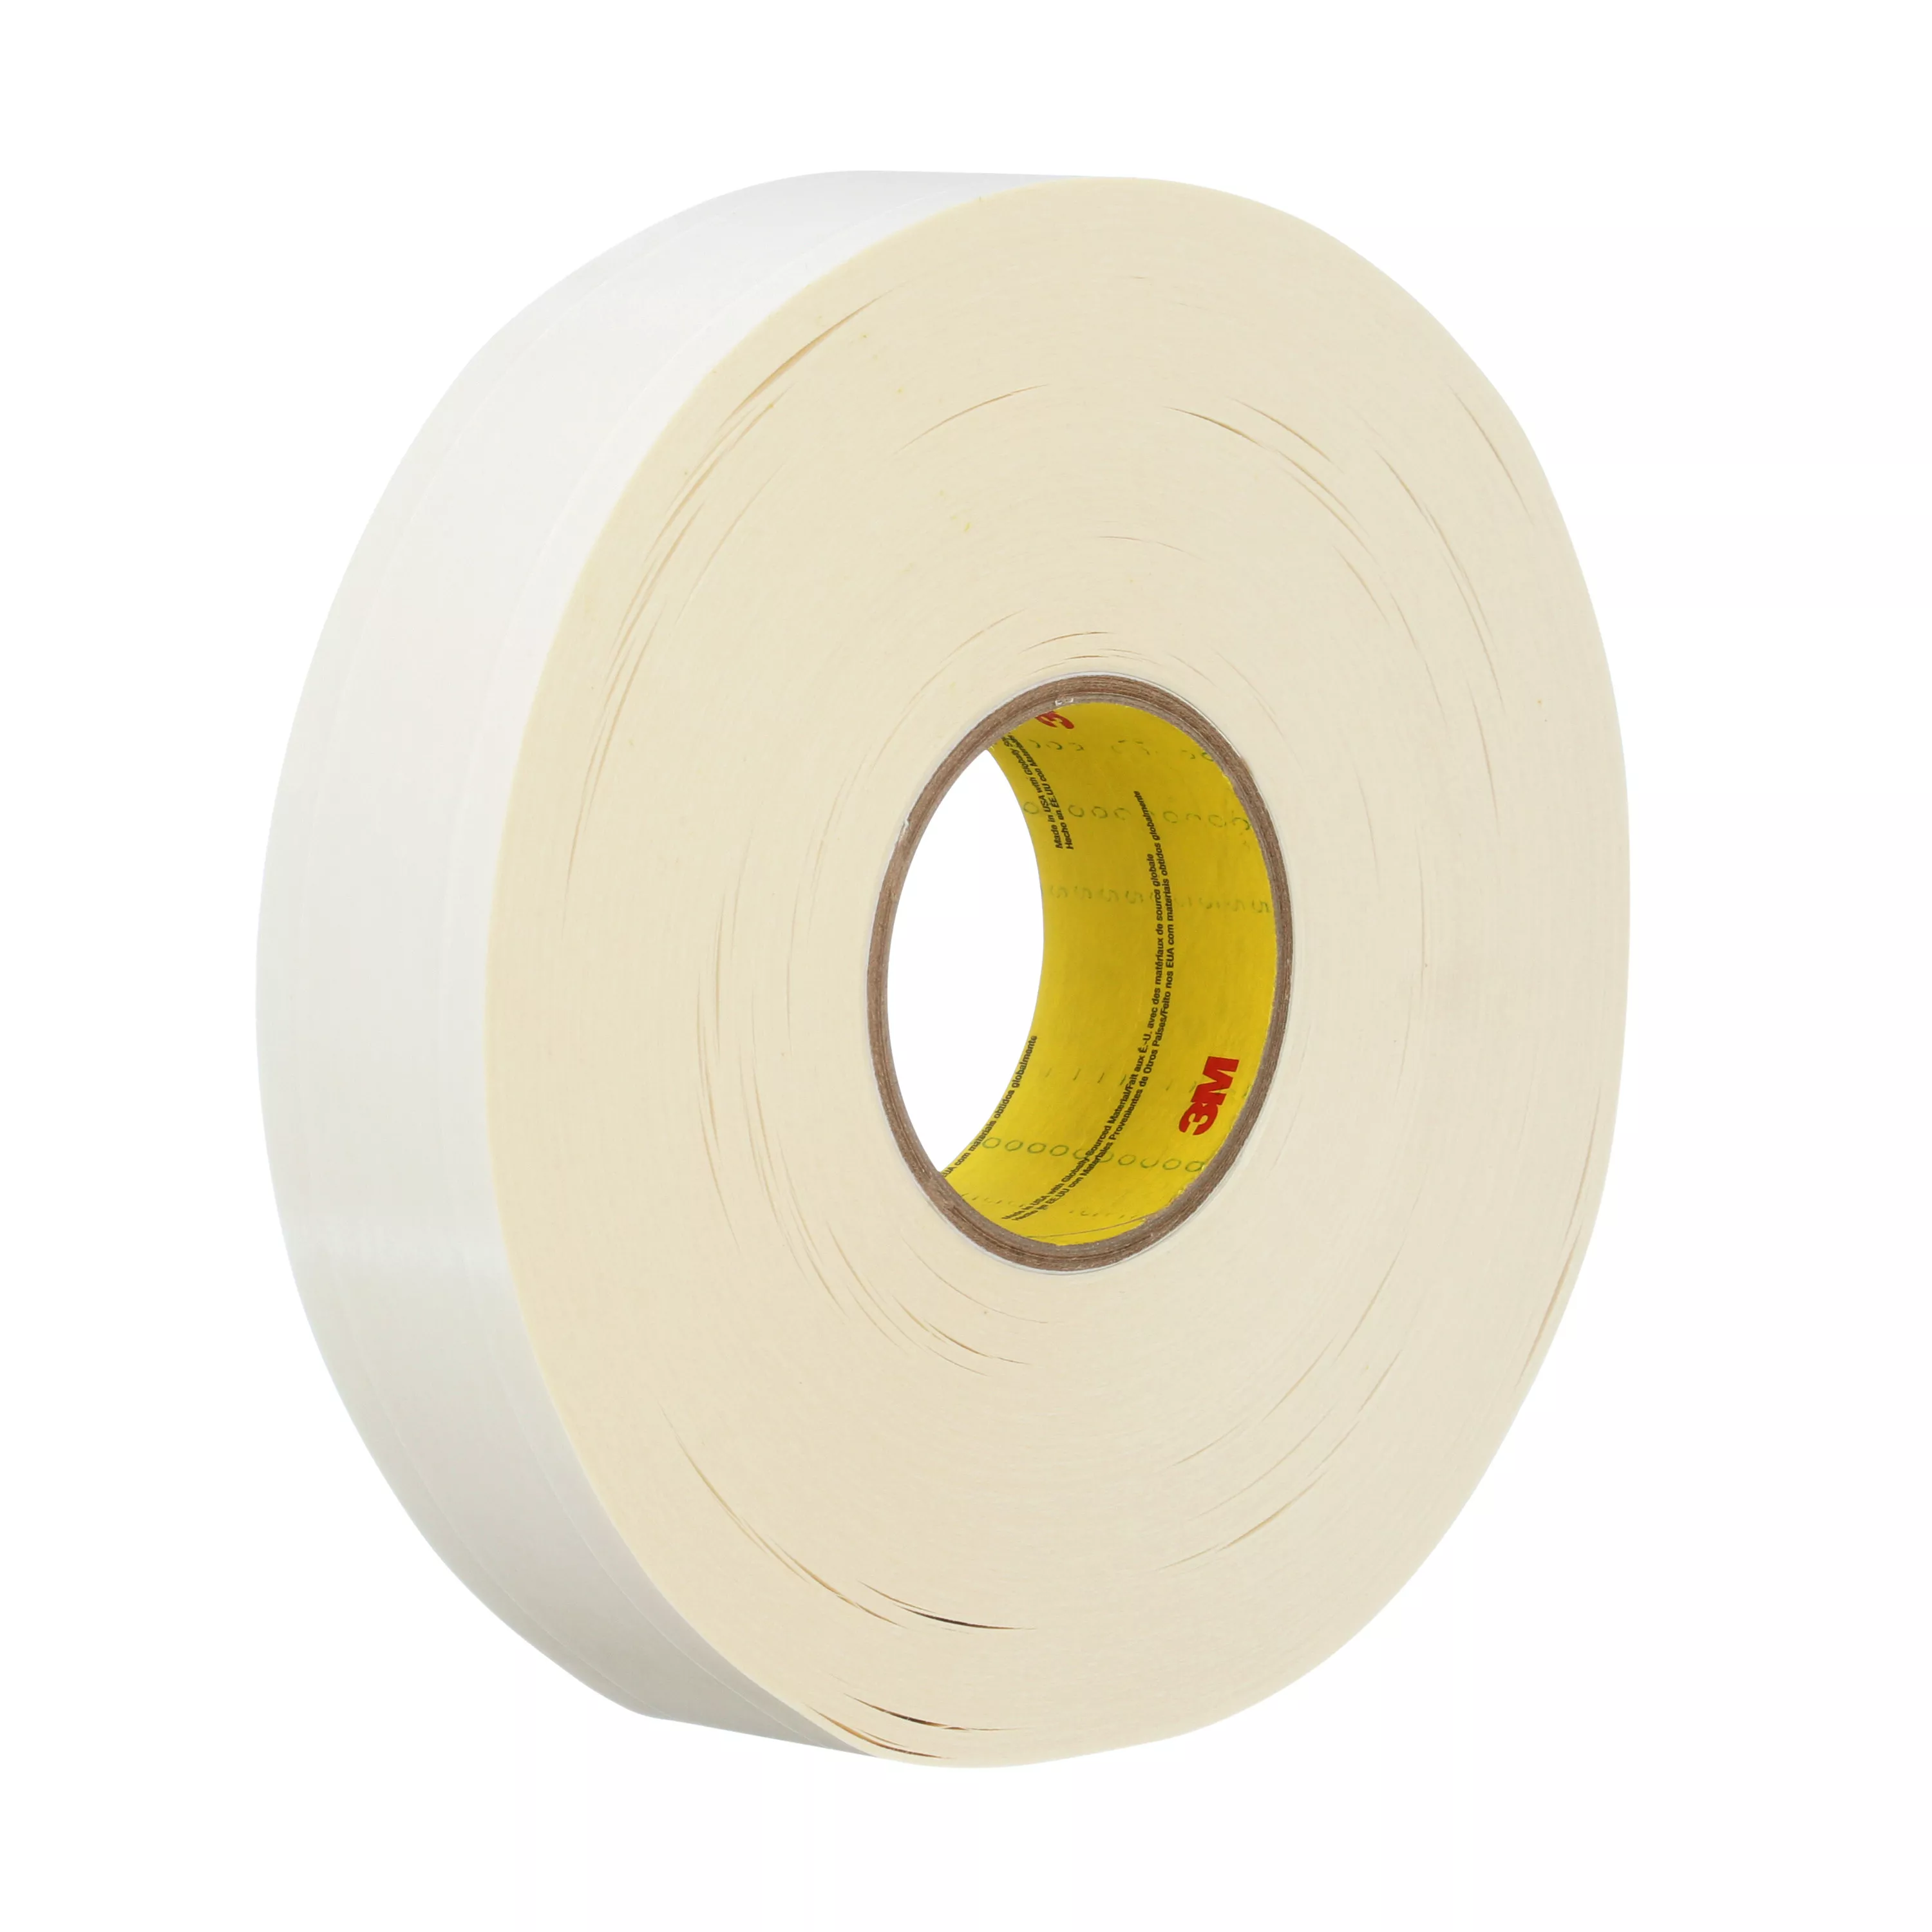 SKU 7100028175 | 3M™ Repulpable Heavy Duty Double Coated Tape R3287